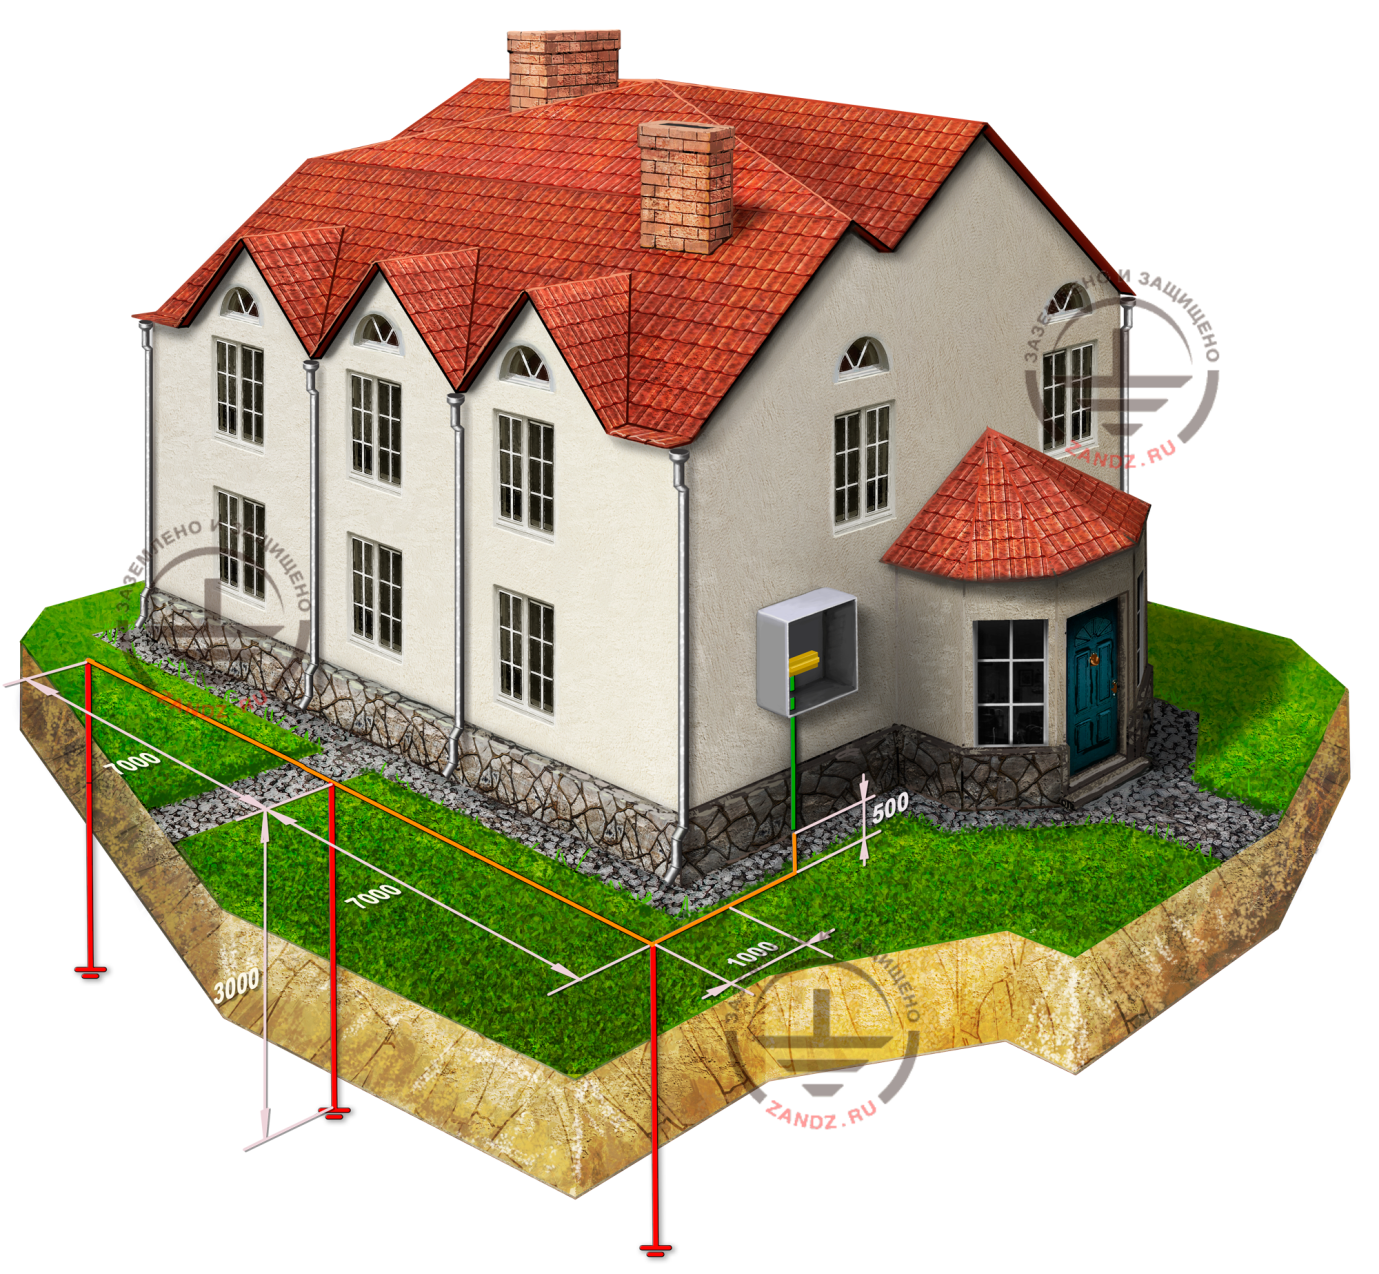 Scheme of grounding connection in a country house